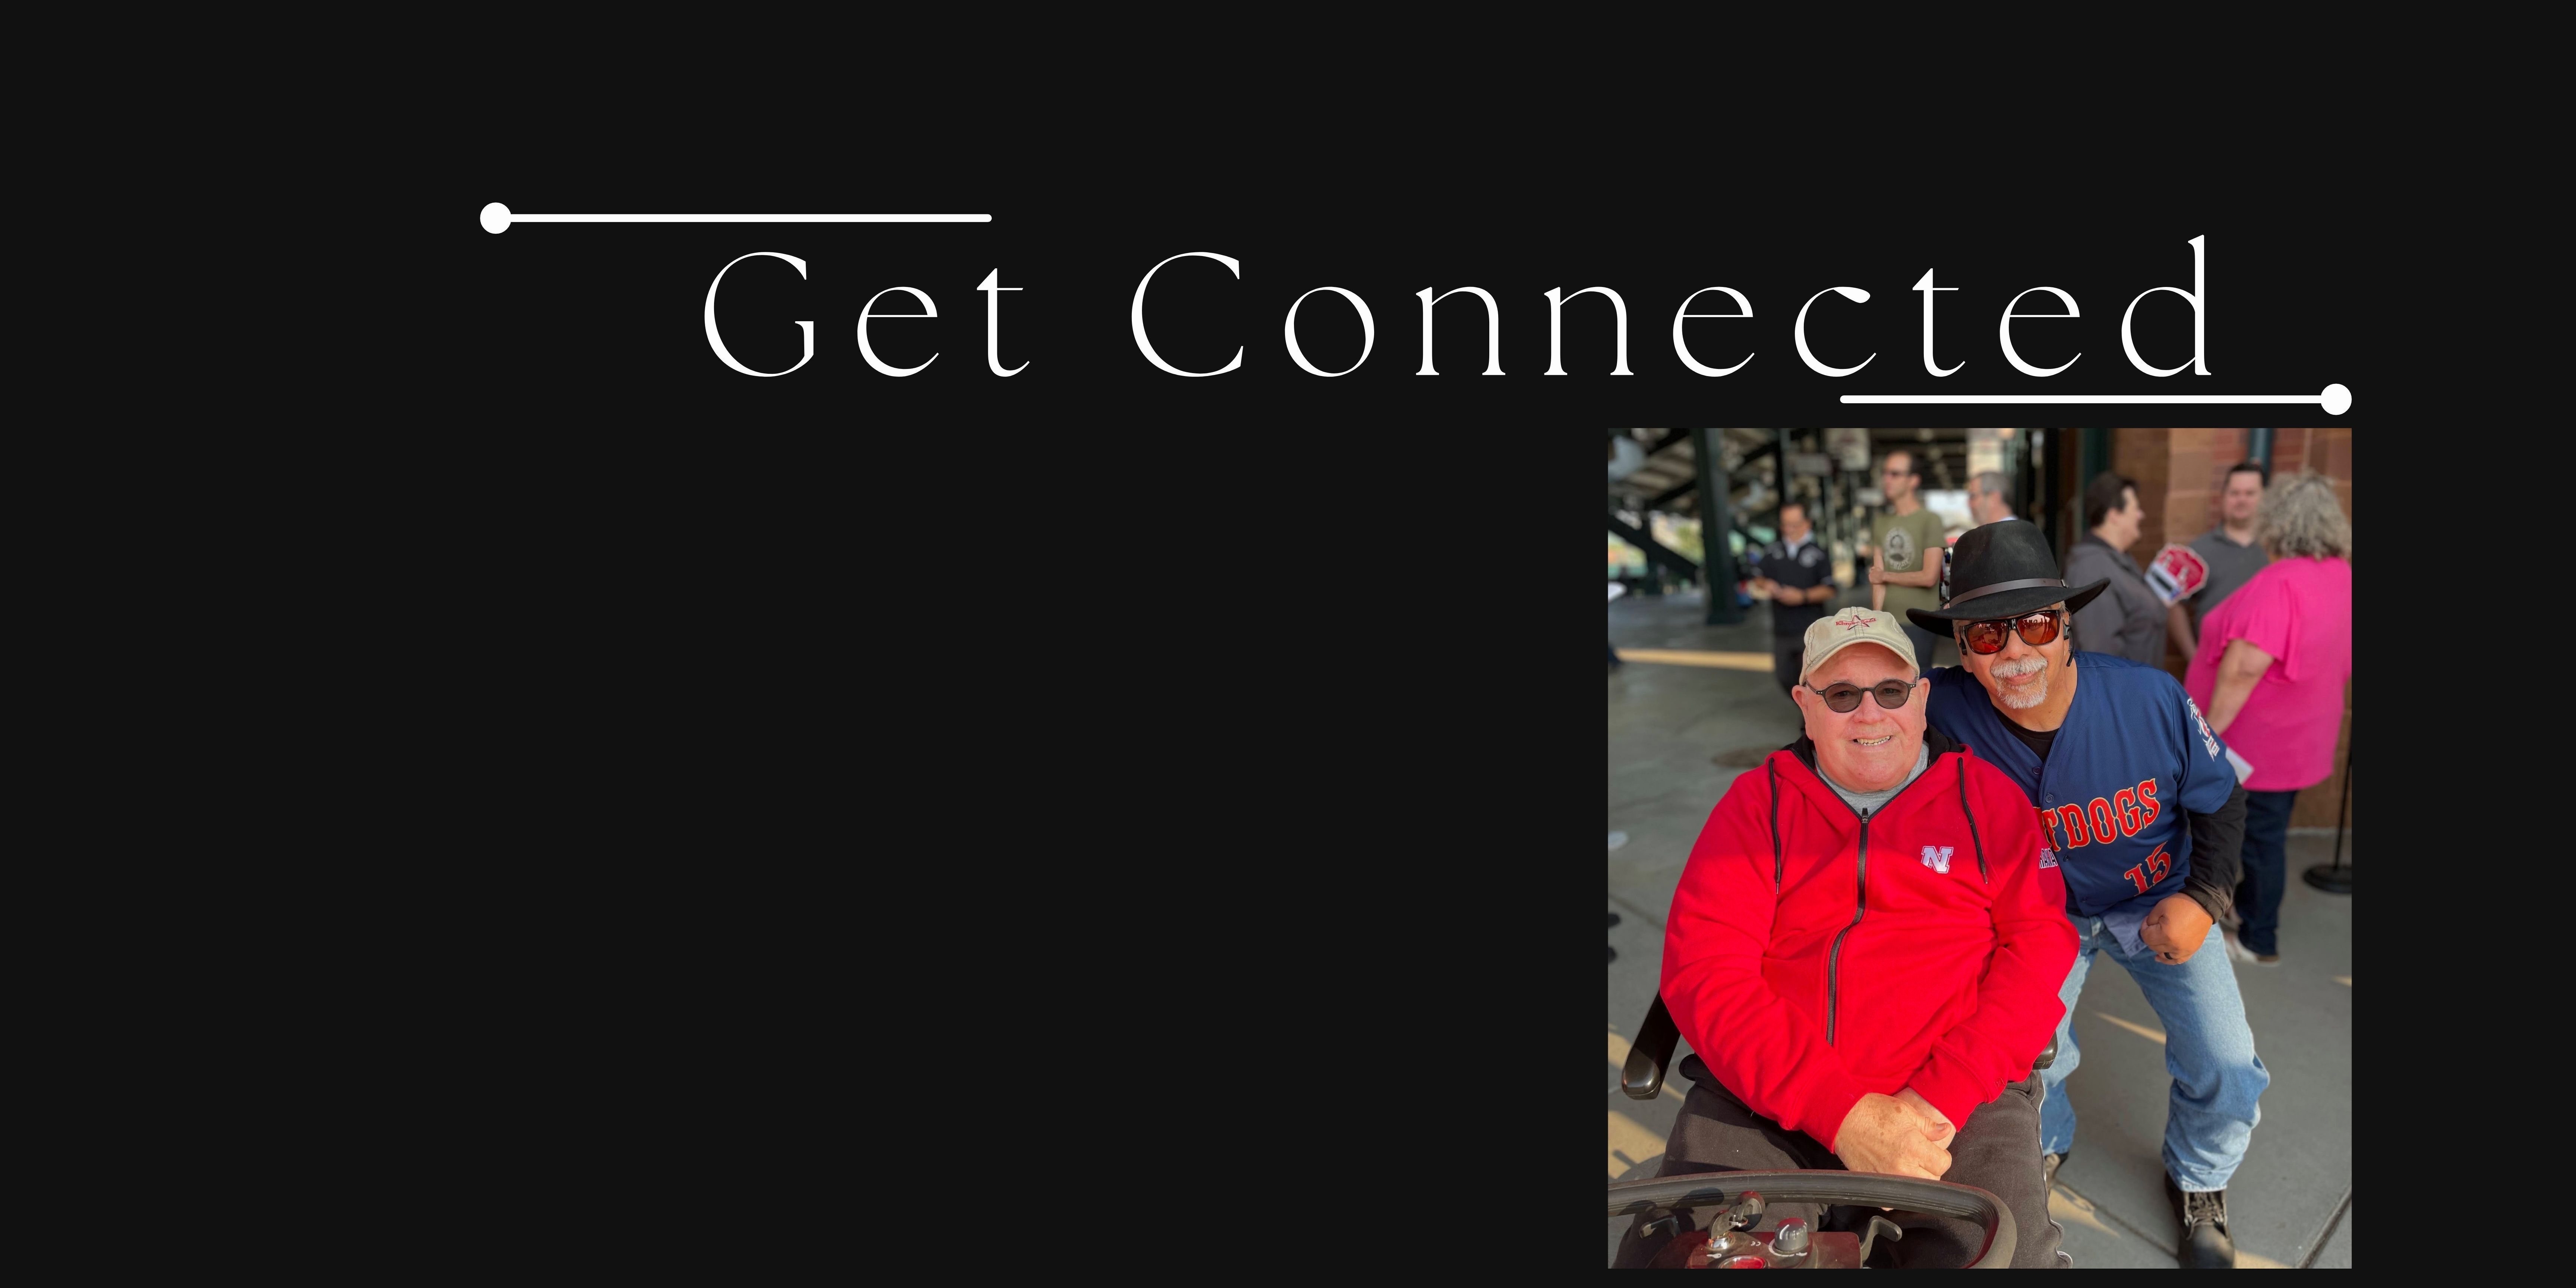 Get Connected today!